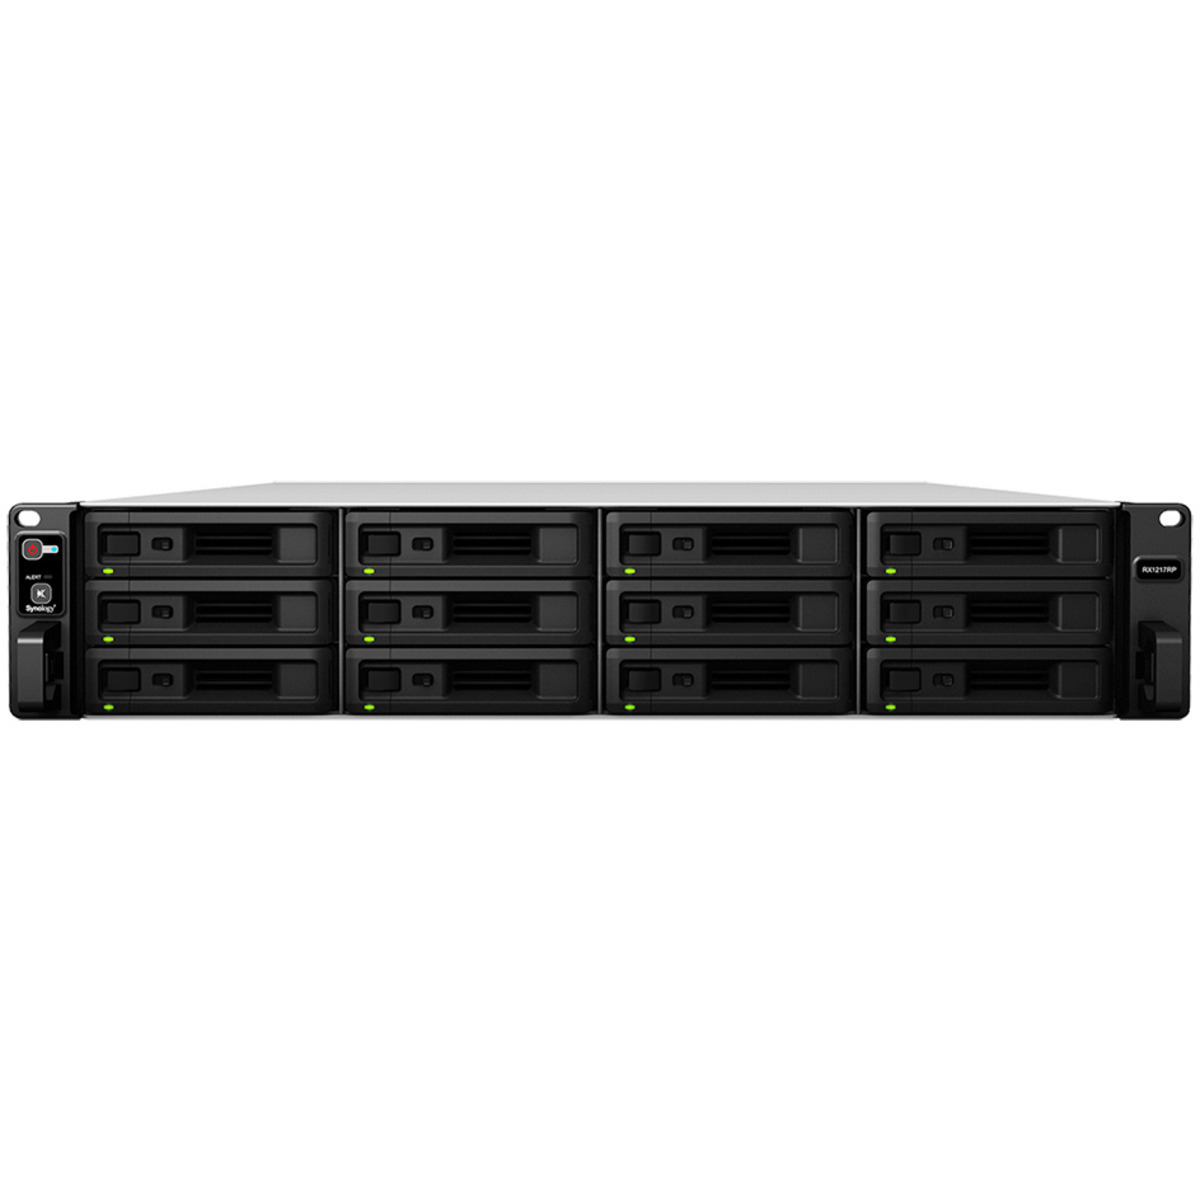 buy $4077 Synology RX1217RP 66tb RackMount Expansion Enclosure 11x6000gb Western Digital Blue WD60EZAZ 3.5 5400rpm SATA 6Gb/s HDD CONSUMER Class Drives Installed - Burn-In Tested - nas headquarters buy network attached storage server device das new raid-5 free shipping usa christmas new year holiday sale RX1217RP